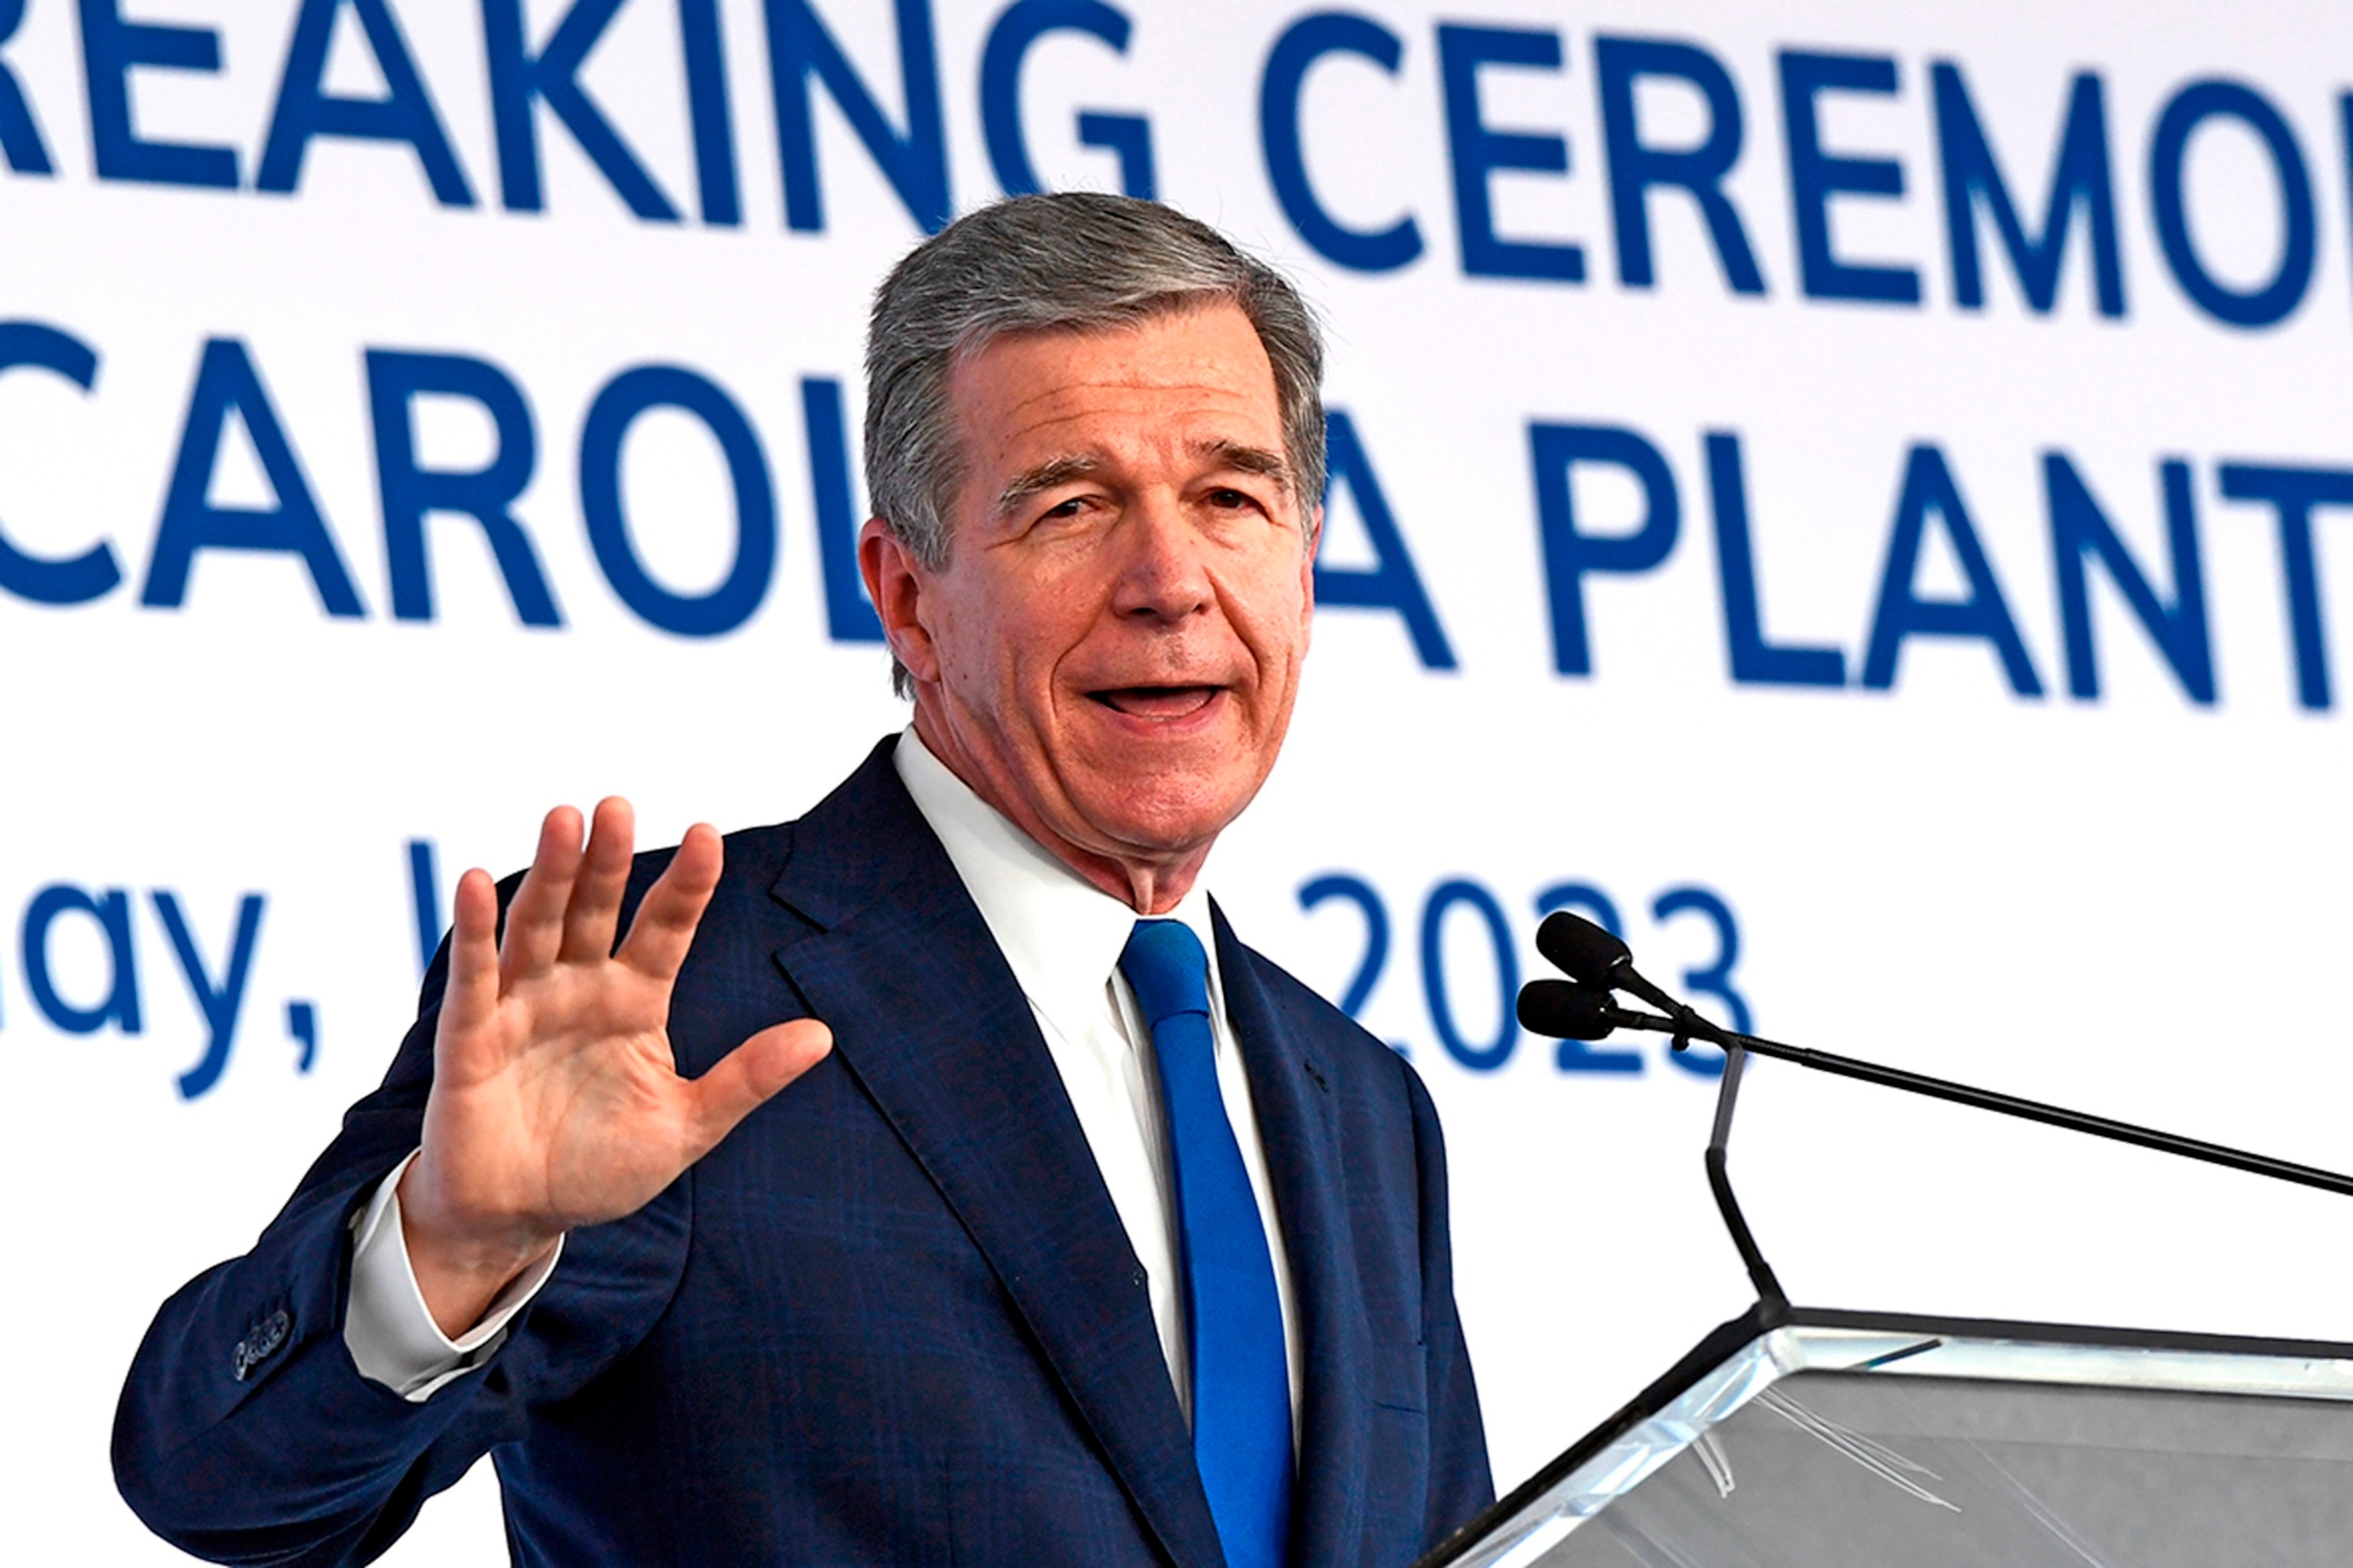 PHOTO: In this July 28, 2023, file photo, North Carolina Gov. Roy Cooper speaks as an event in Chatham County, N.C.